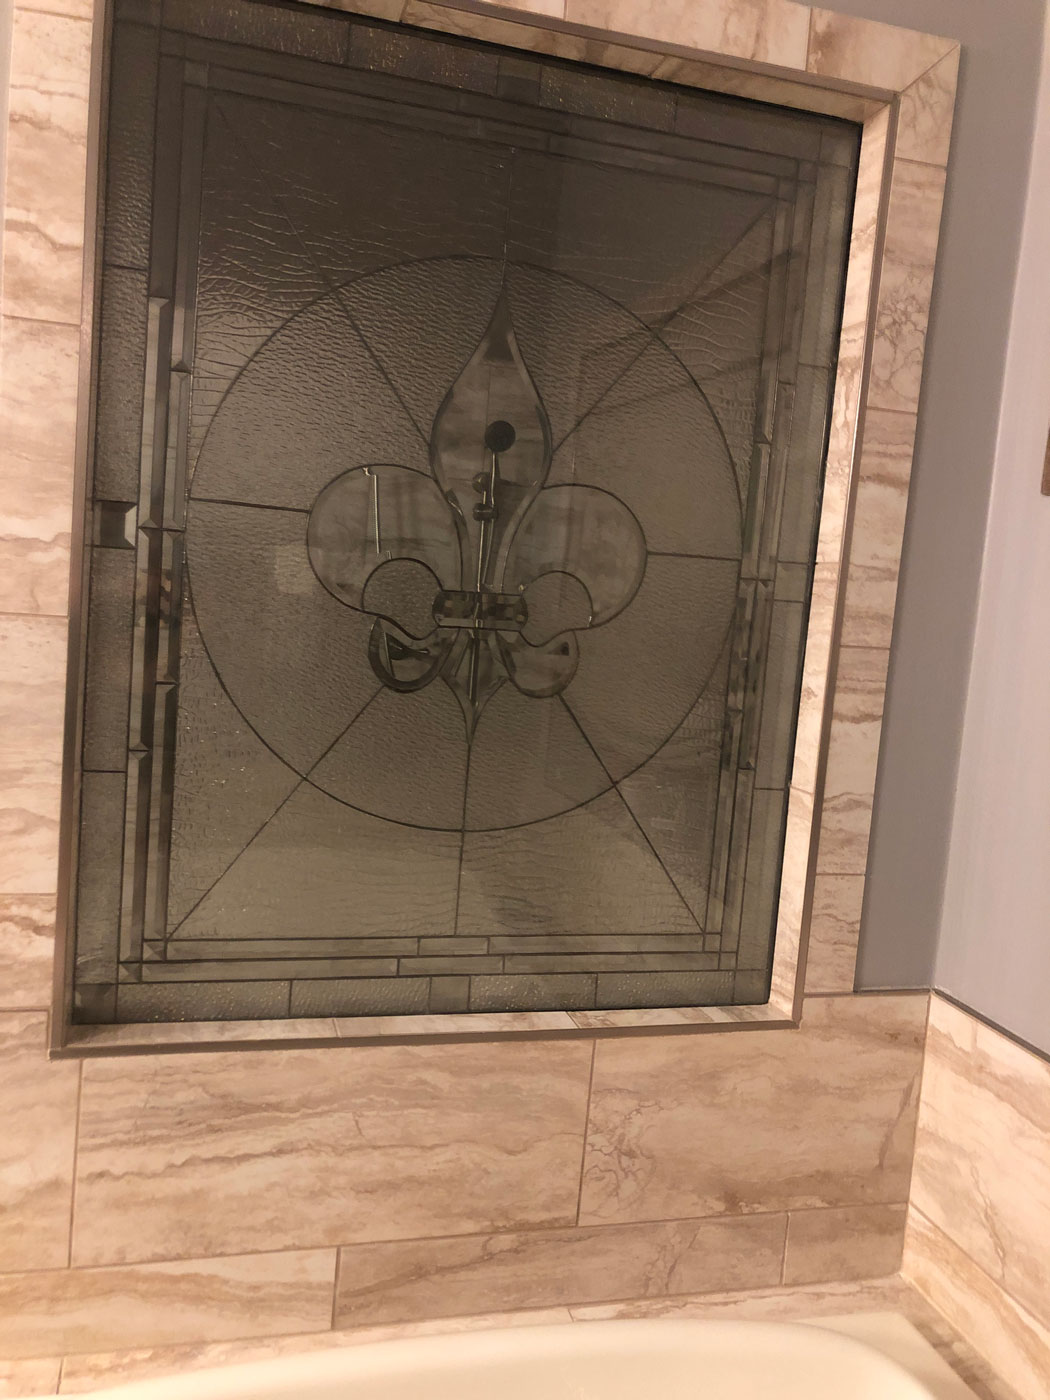 Clear Stained Glass installed over a Bathtub